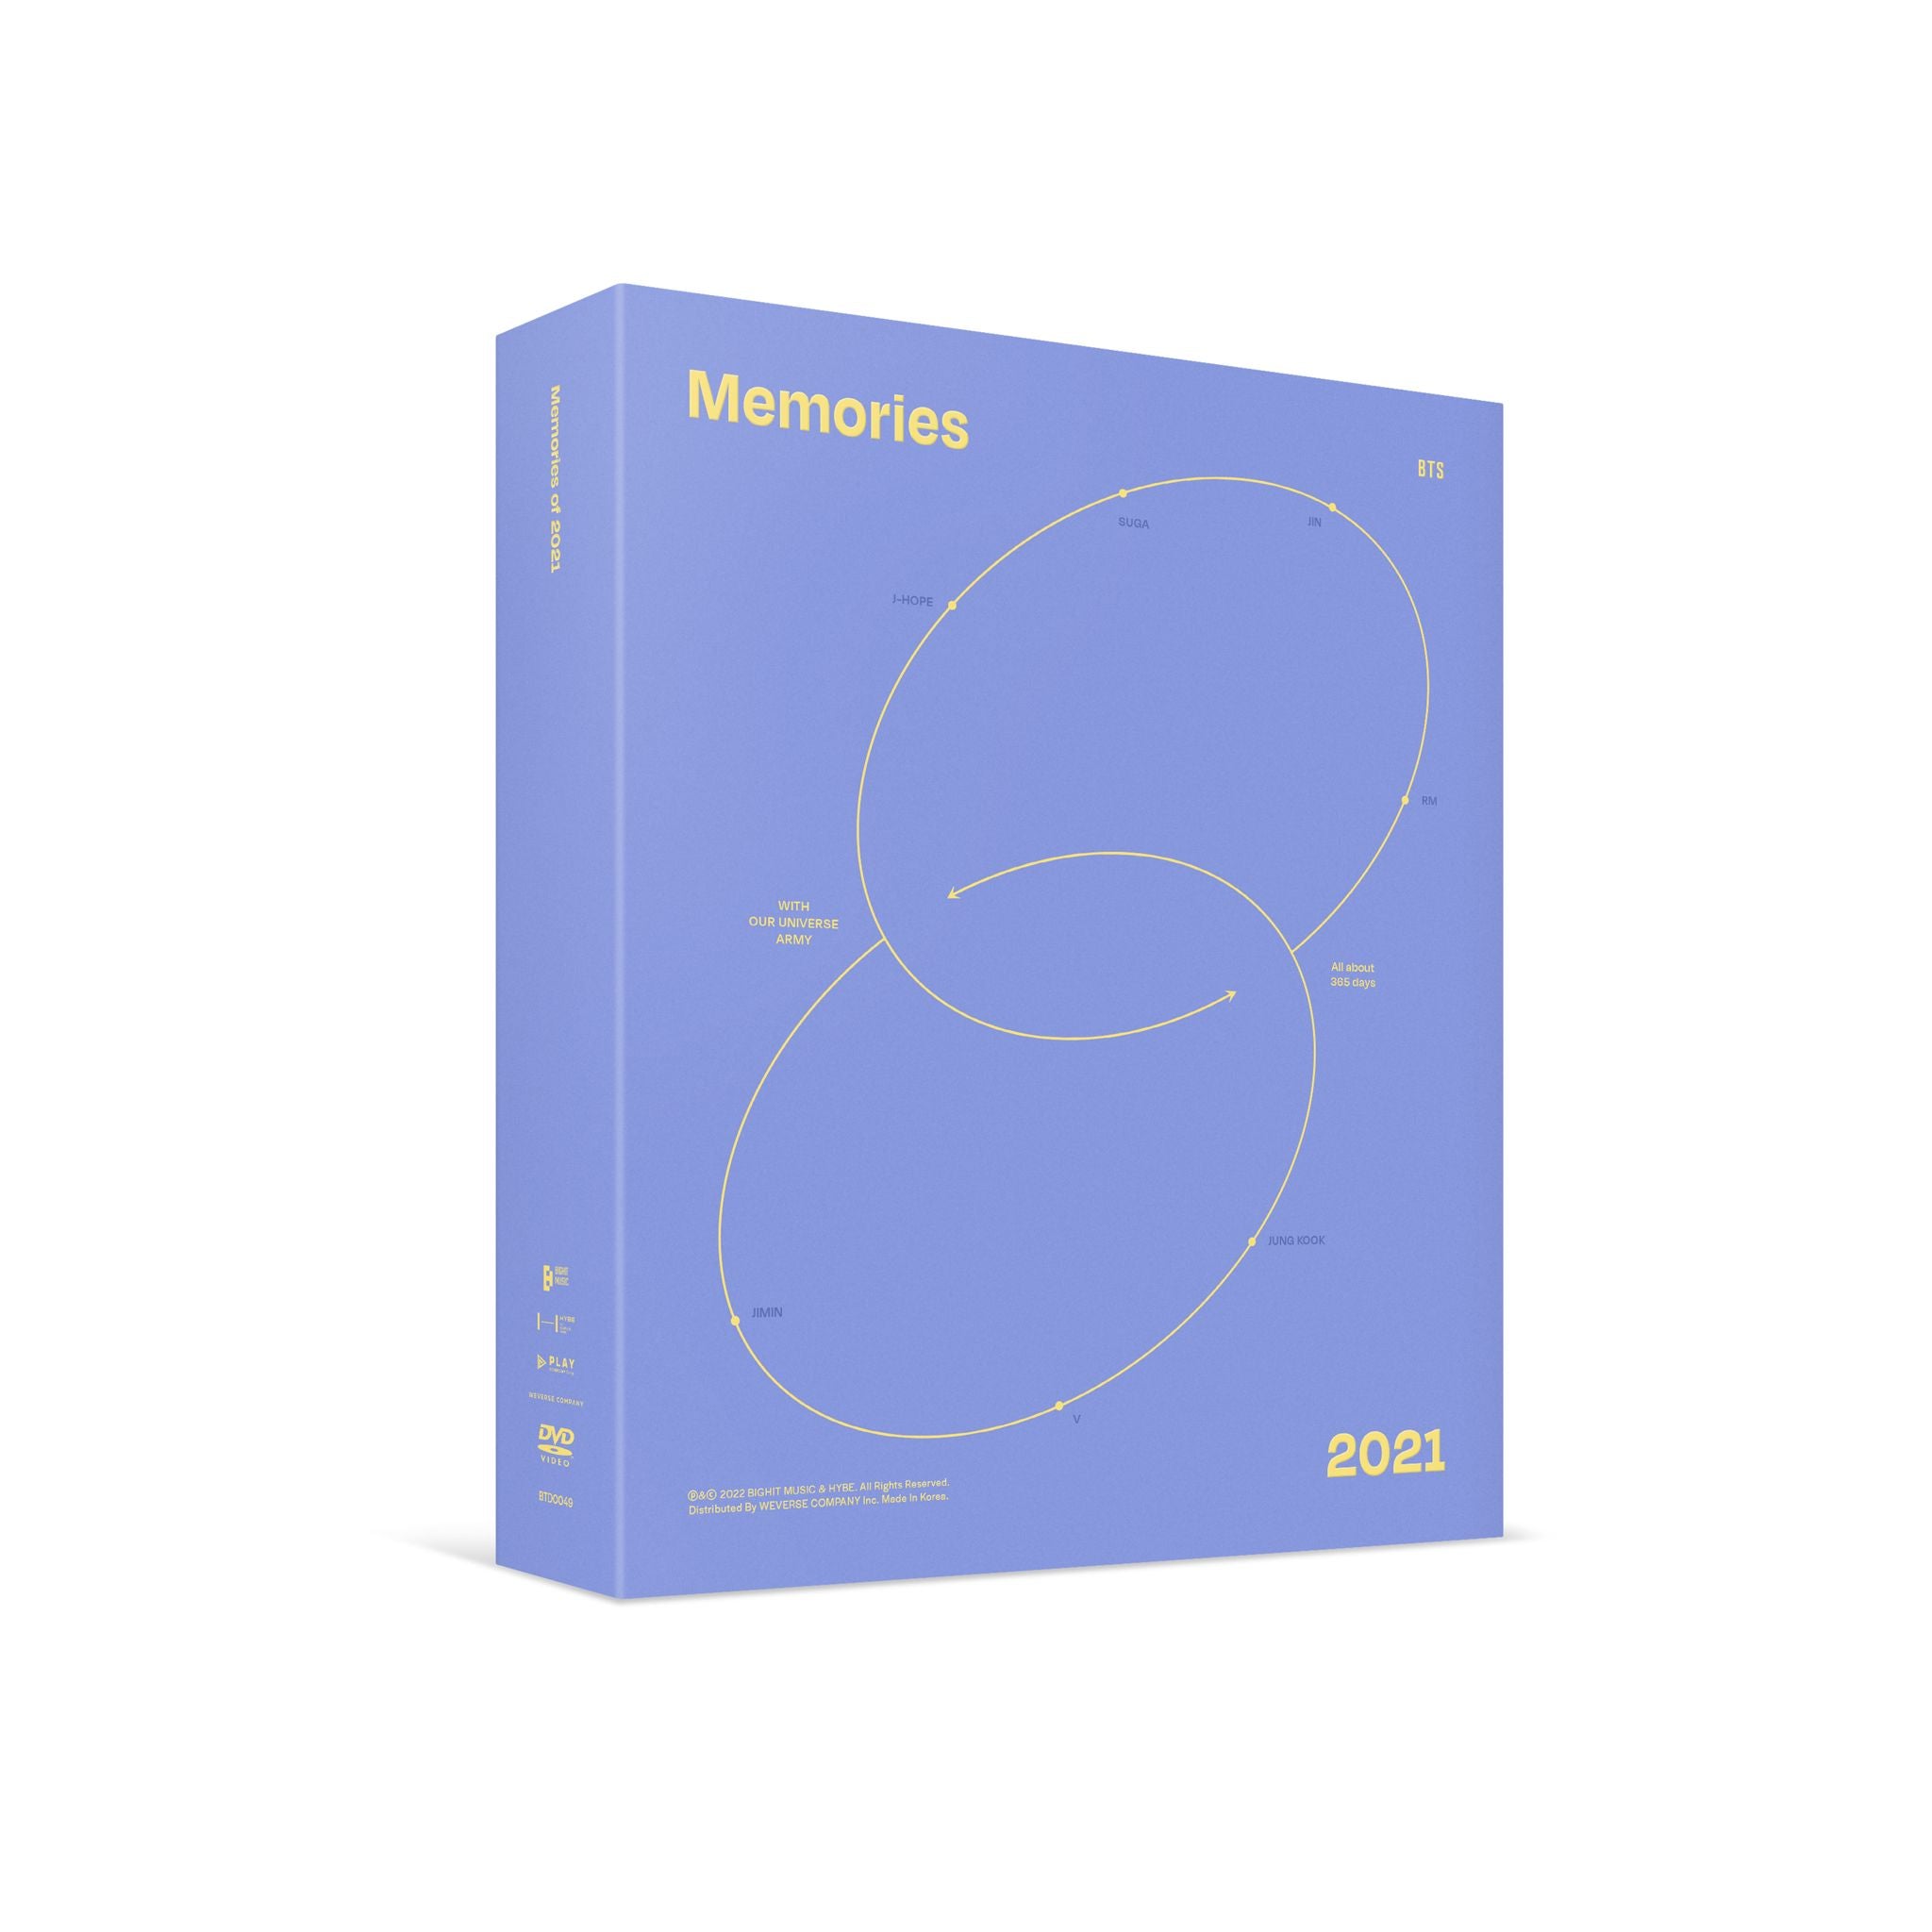 BTS - MEMORIES OF 2021 DVD (3RD PRESS) (Free Shipping Available)